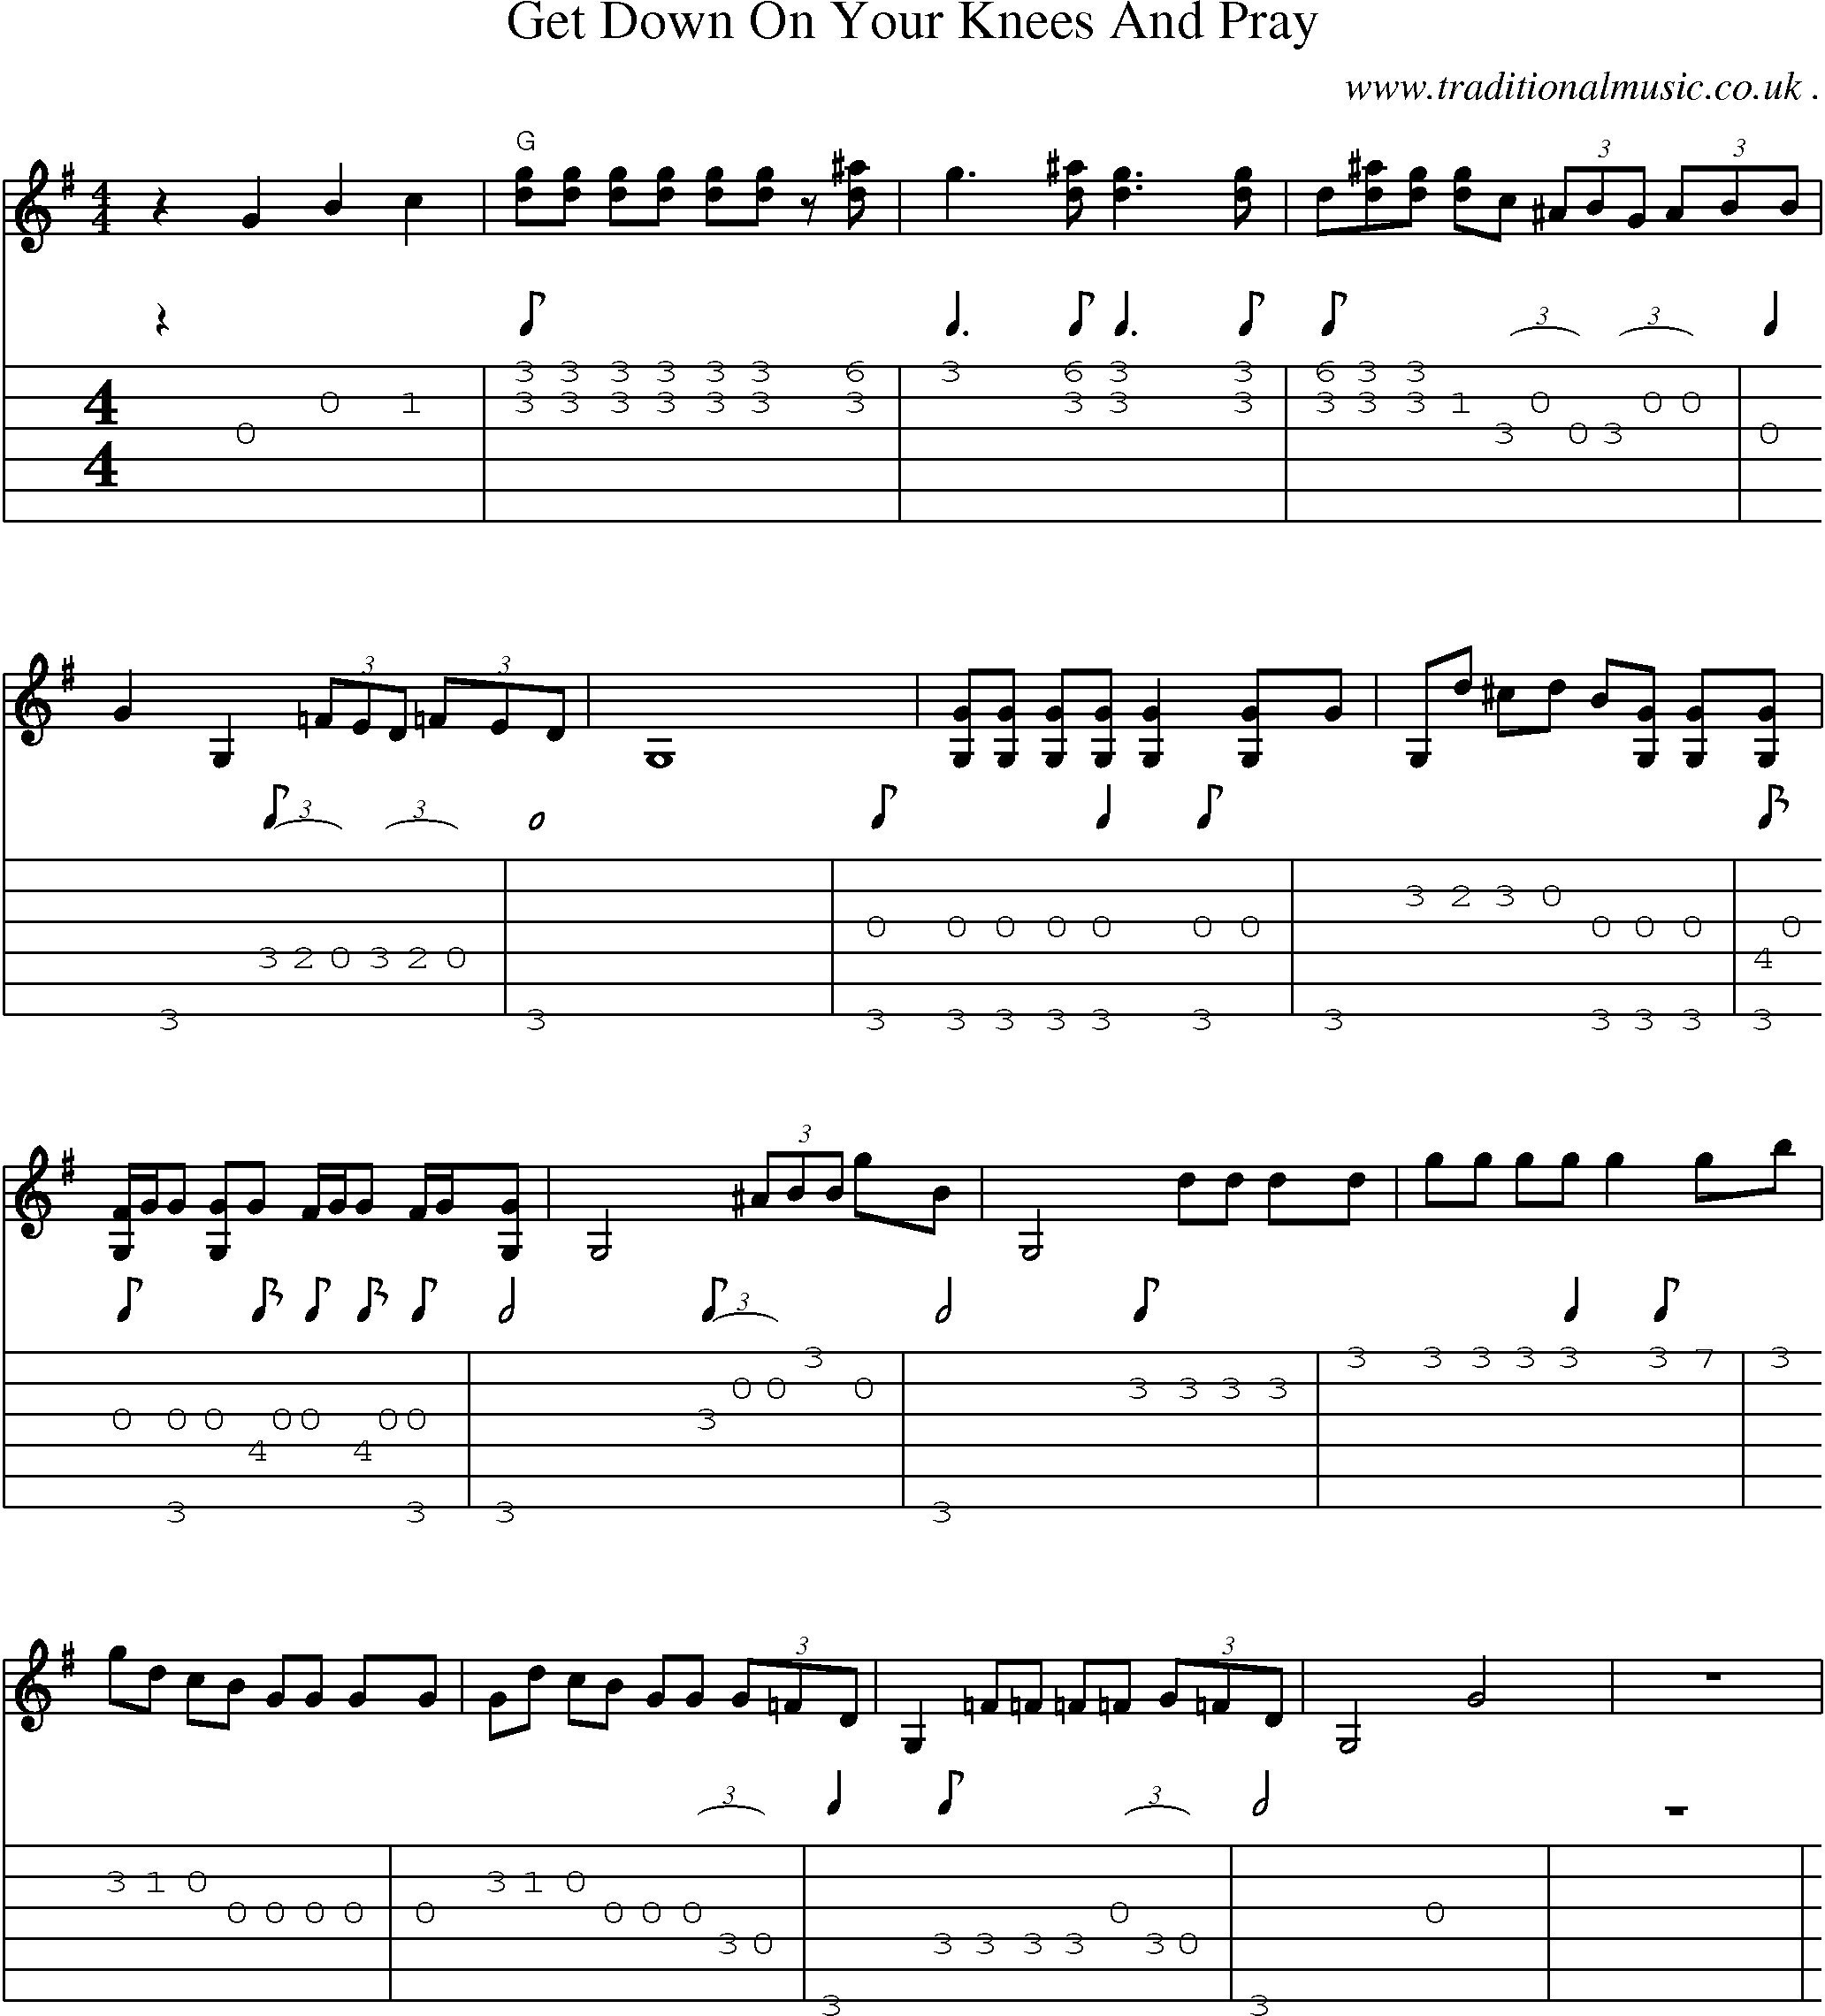 Music Score and Guitar Tabs for Get Down On Your Knees And Pray